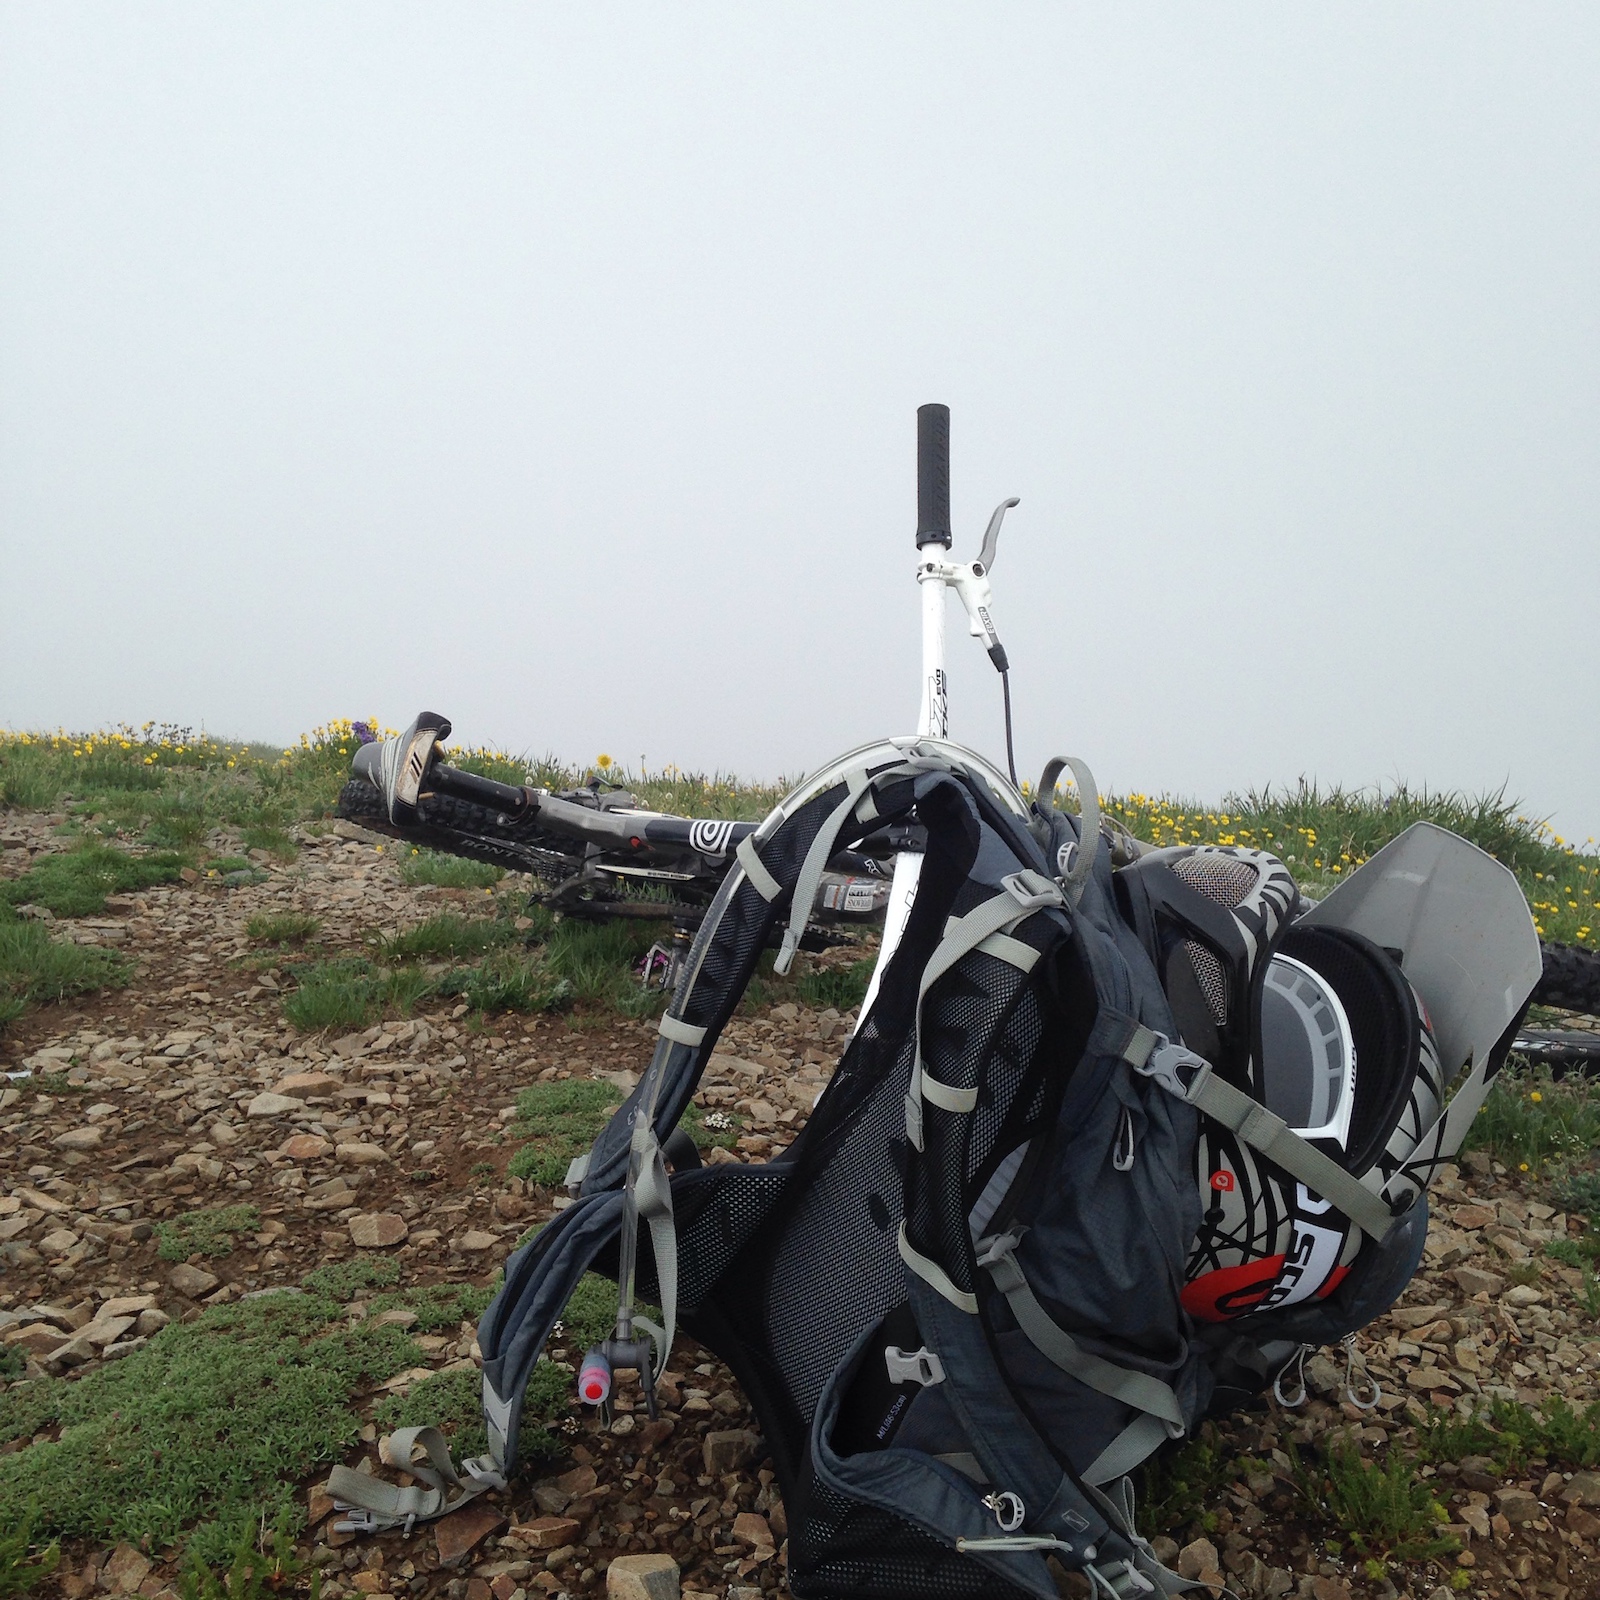 Top of Ruby Peak, can't see!